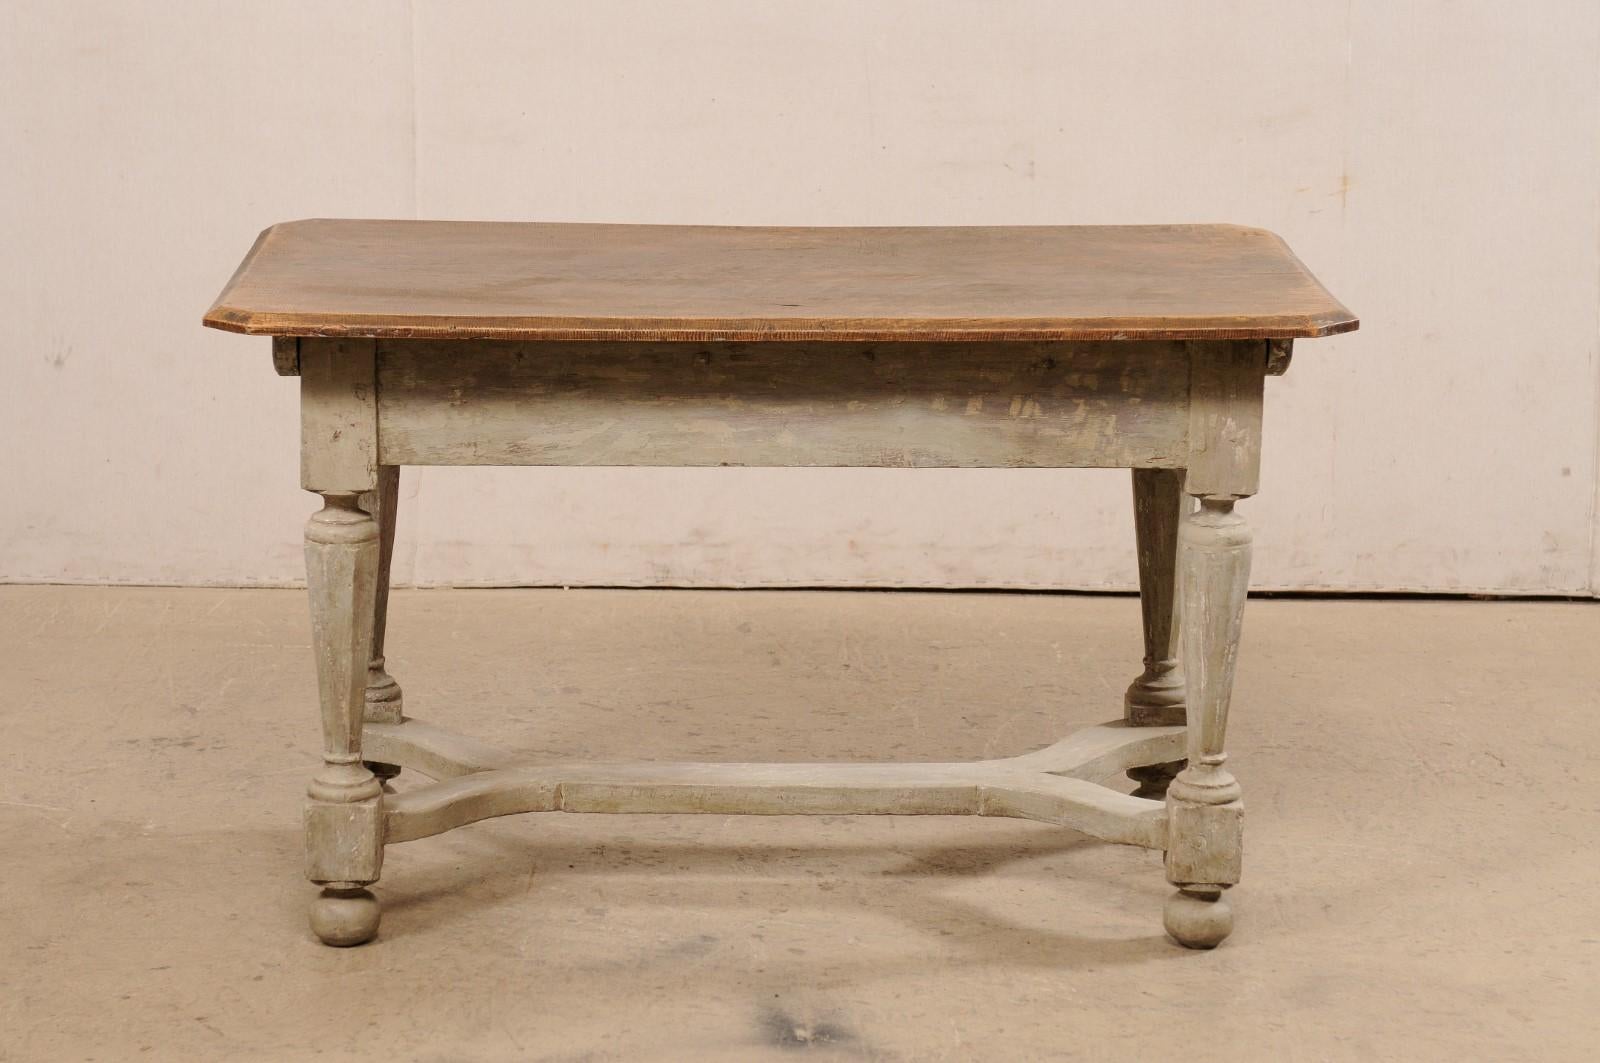 Swedish Period Baroque Carved-Wood Table, circa 1690-1720 For Sale 7